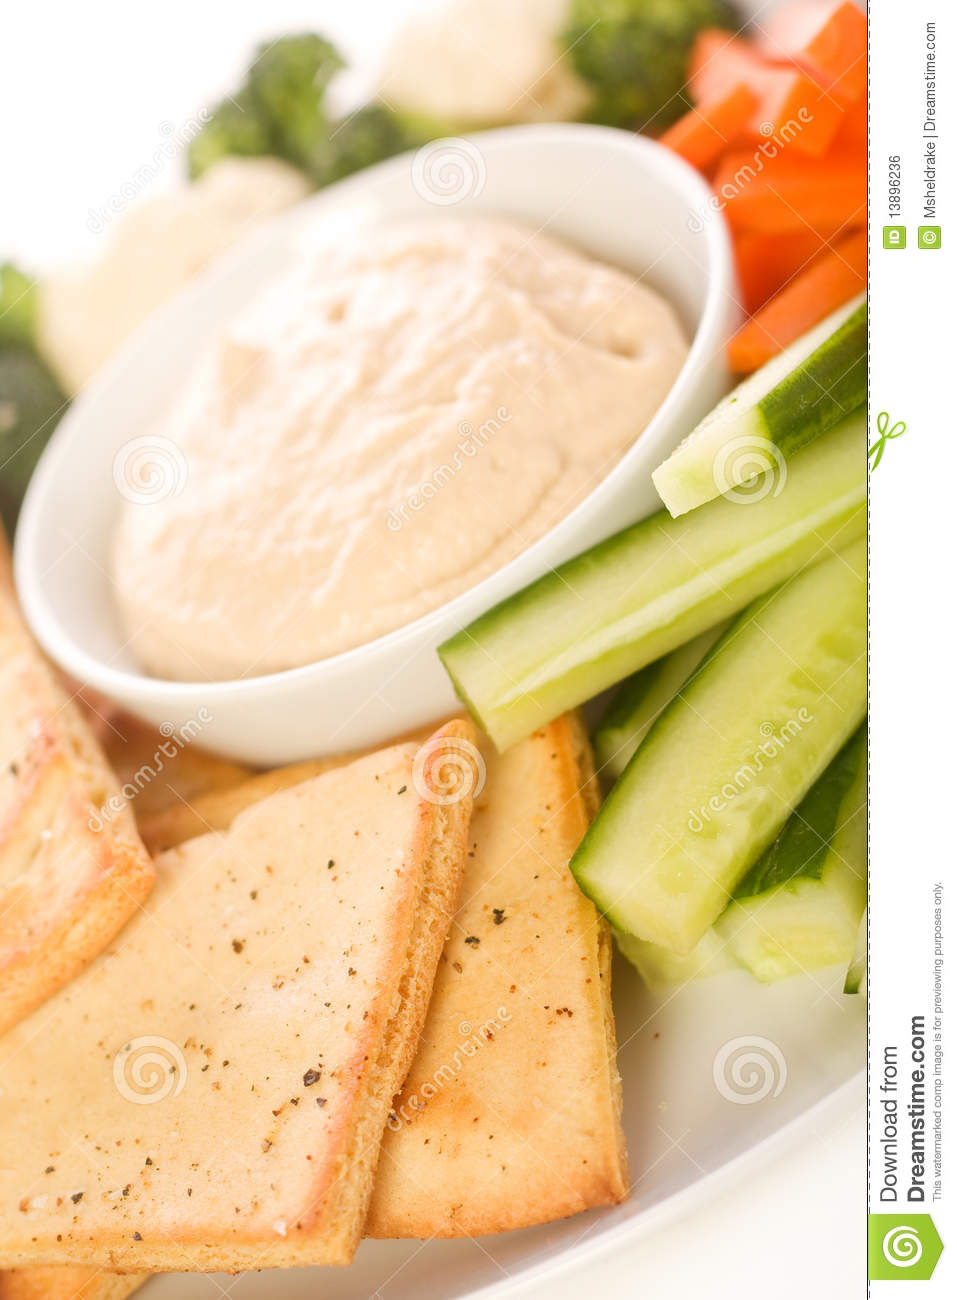 Pita Chips And Fresh Vegetable Make A Healthy Appetizer Or Snack Along